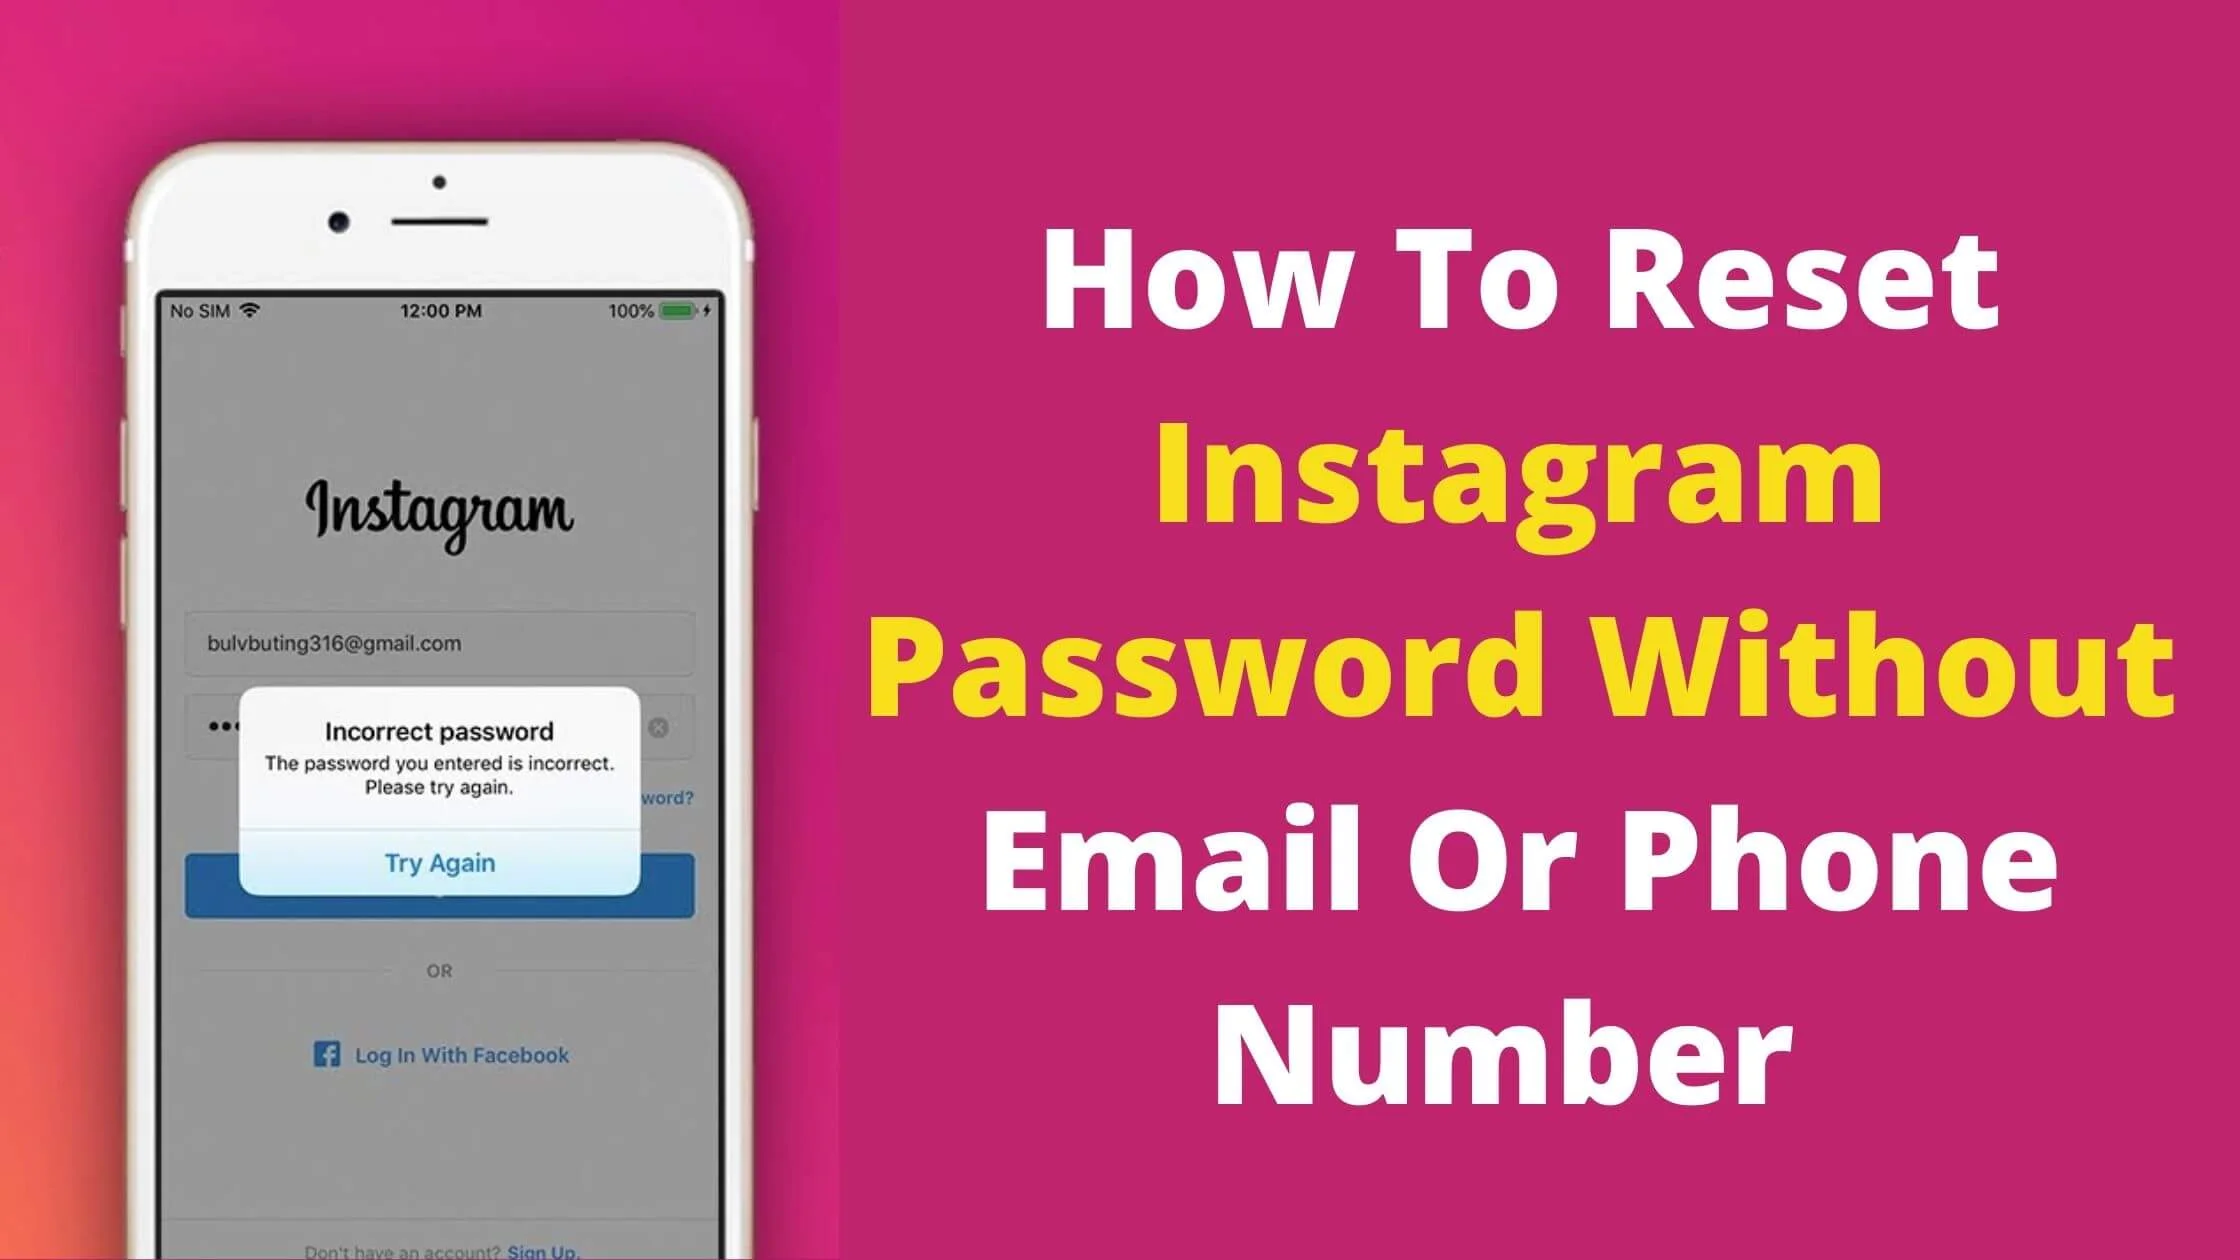 How to Reset Instagram Password Without Email or Phone Number